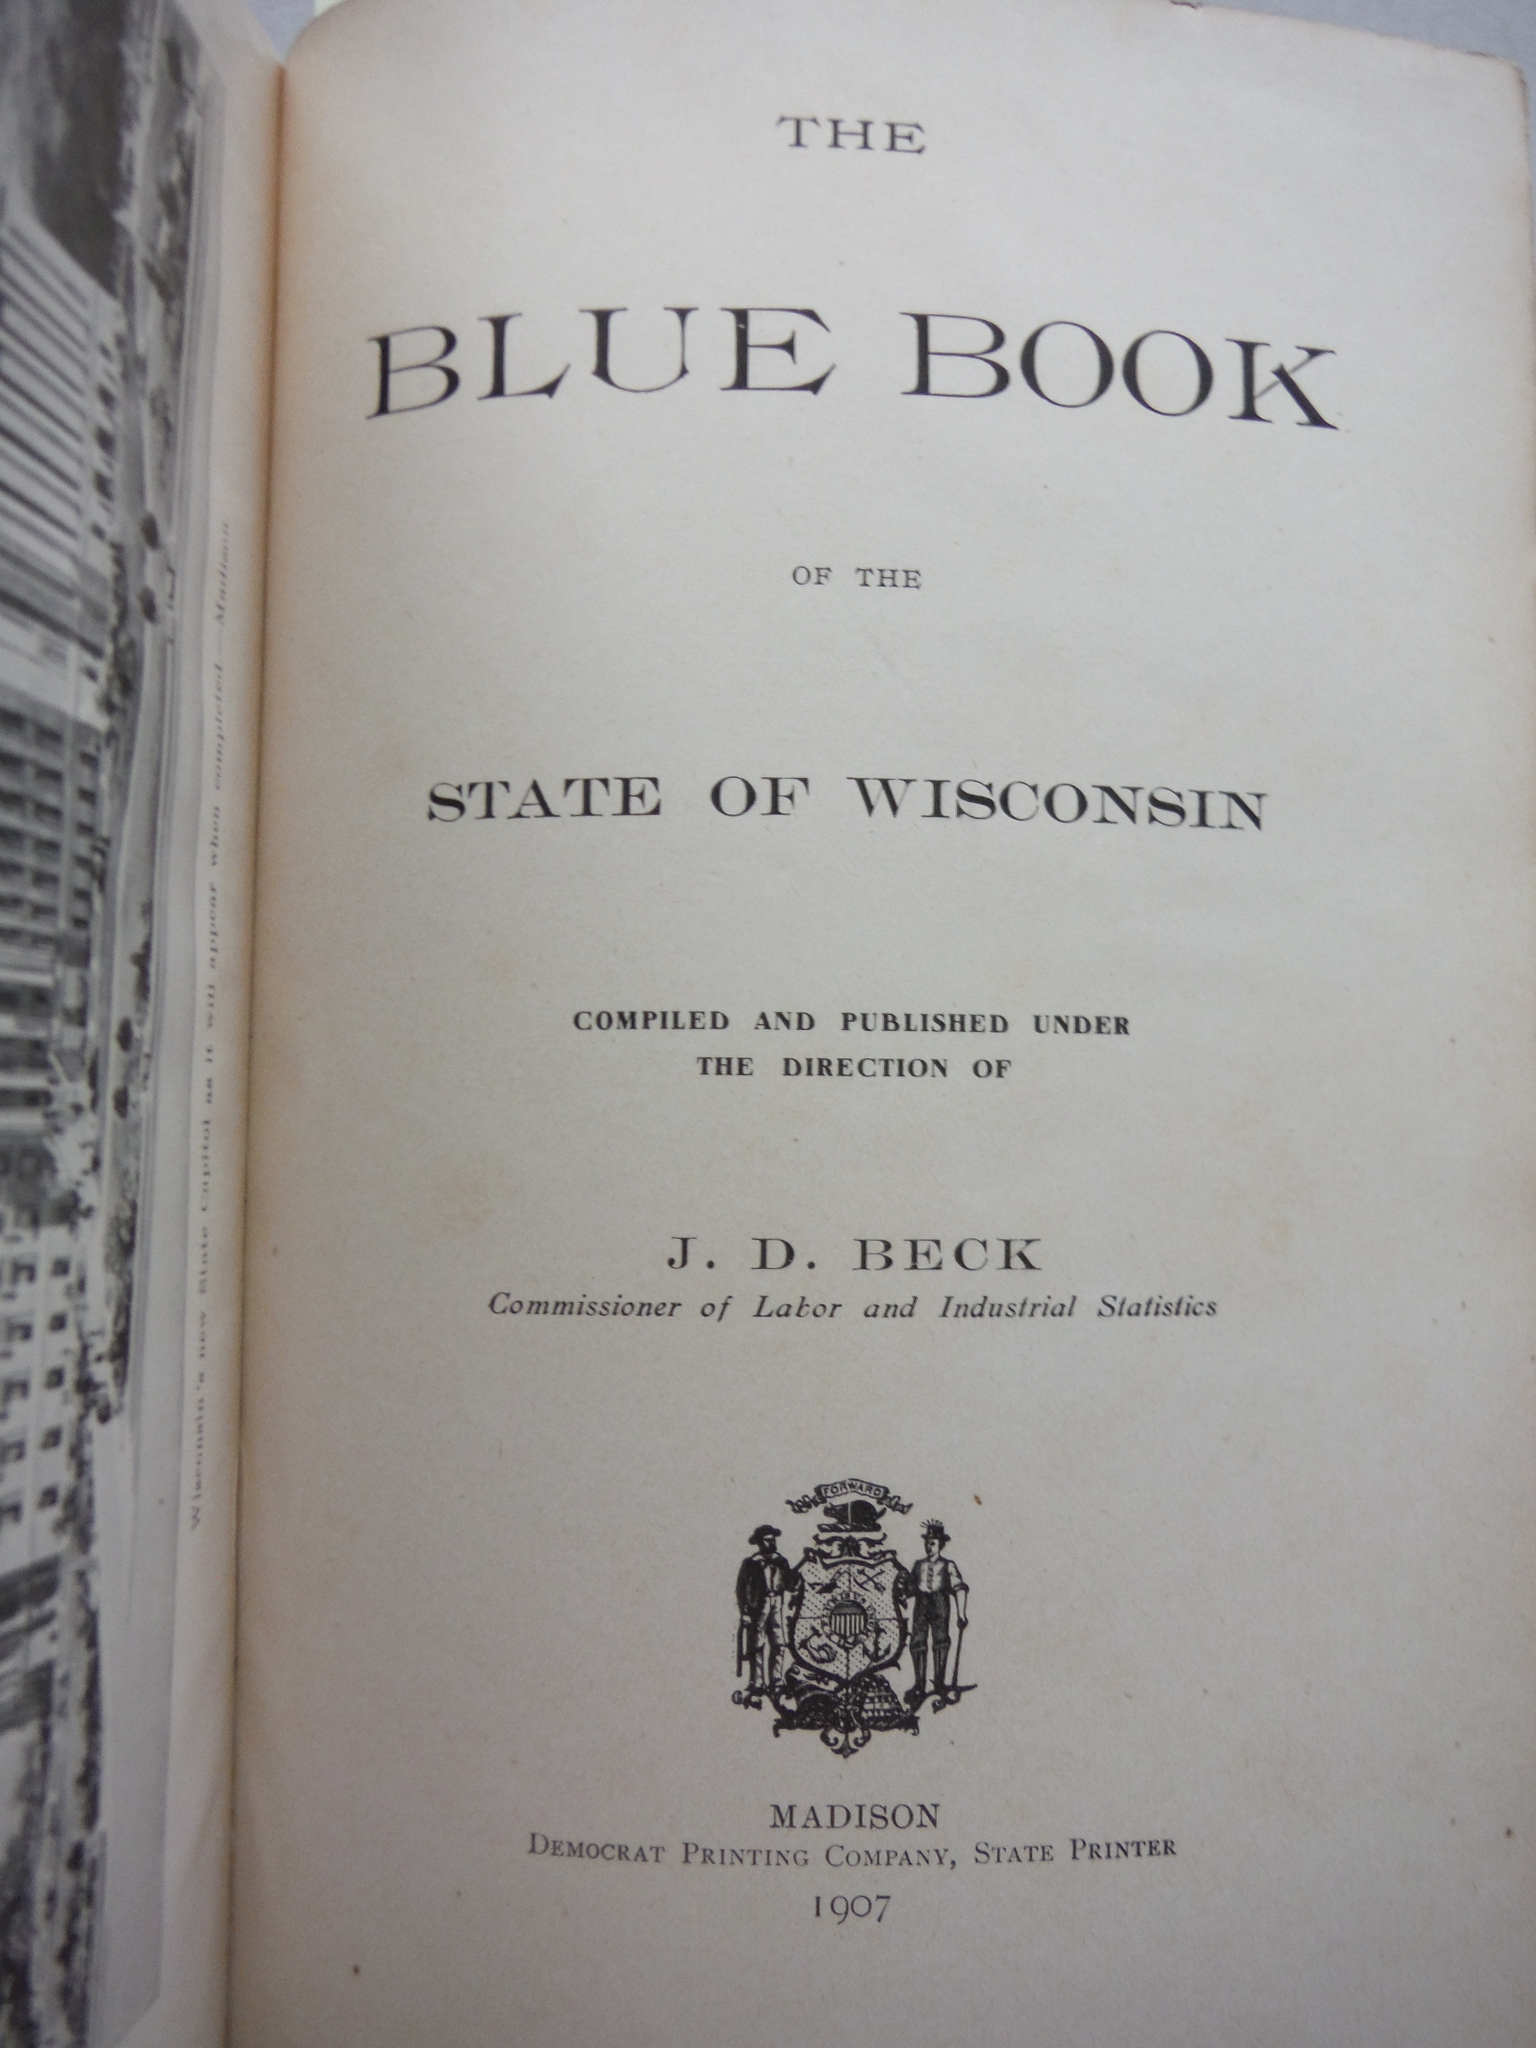 Image 1 of The Blue Book of the State of Wisconsin, 1907